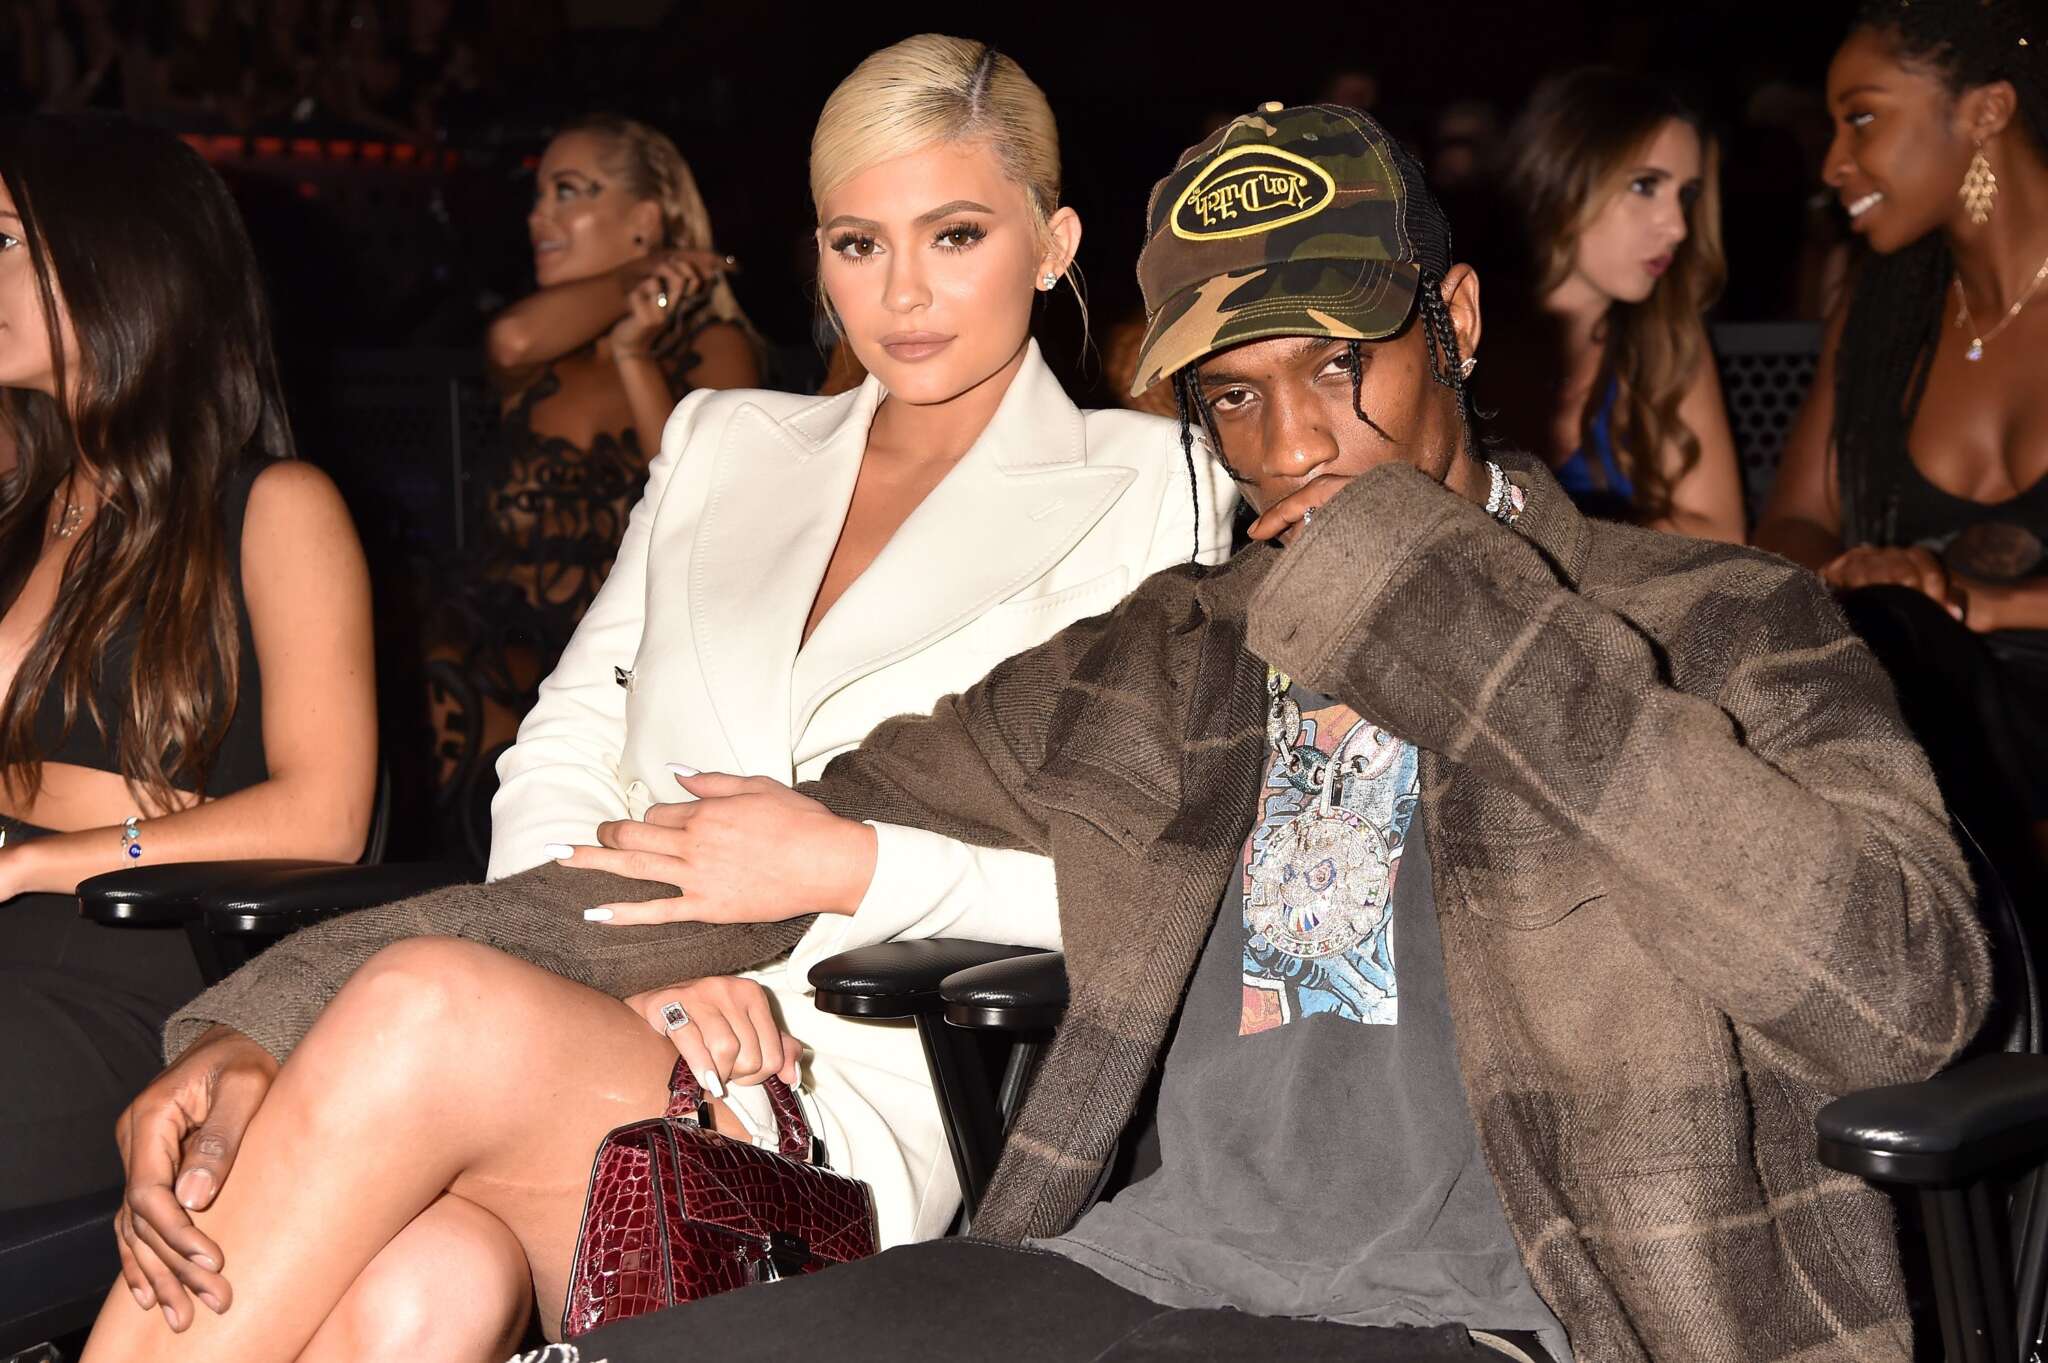 KUWTK: Kylie Jenner And Travis Scott Still ‘Hooking Up’ But Not Back Together – Here’s Why They’re Not Labeling What They Share!